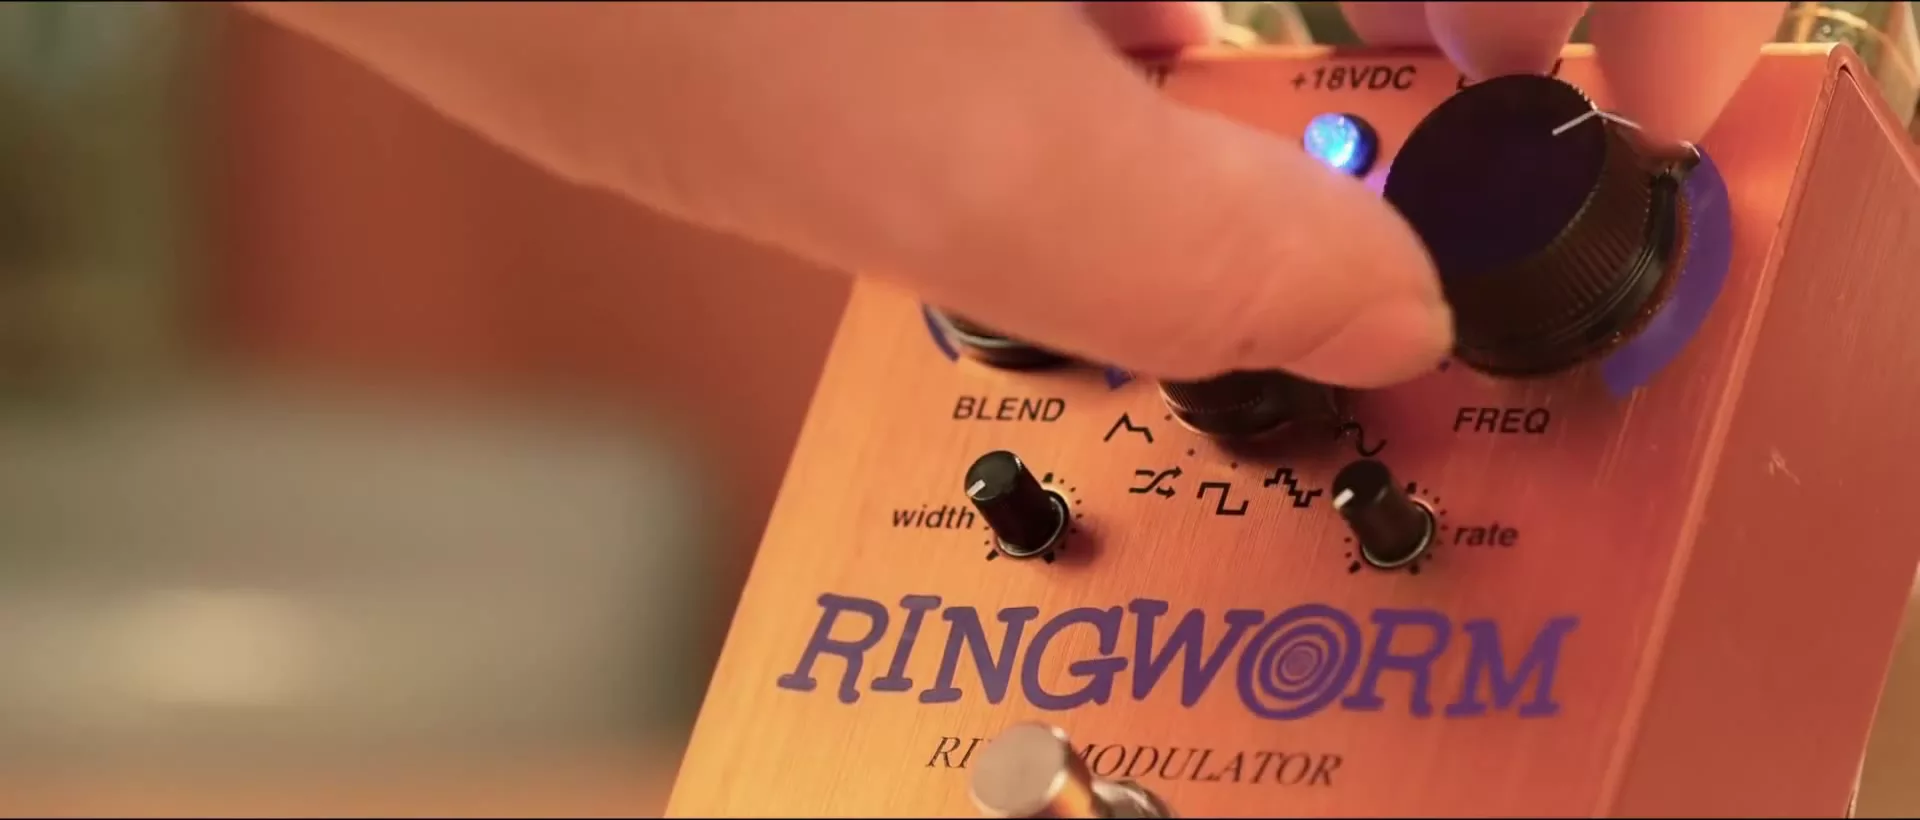 Way Huge Ring Worm Modulator: Overview of Features & Sounds (Instructional Demo)